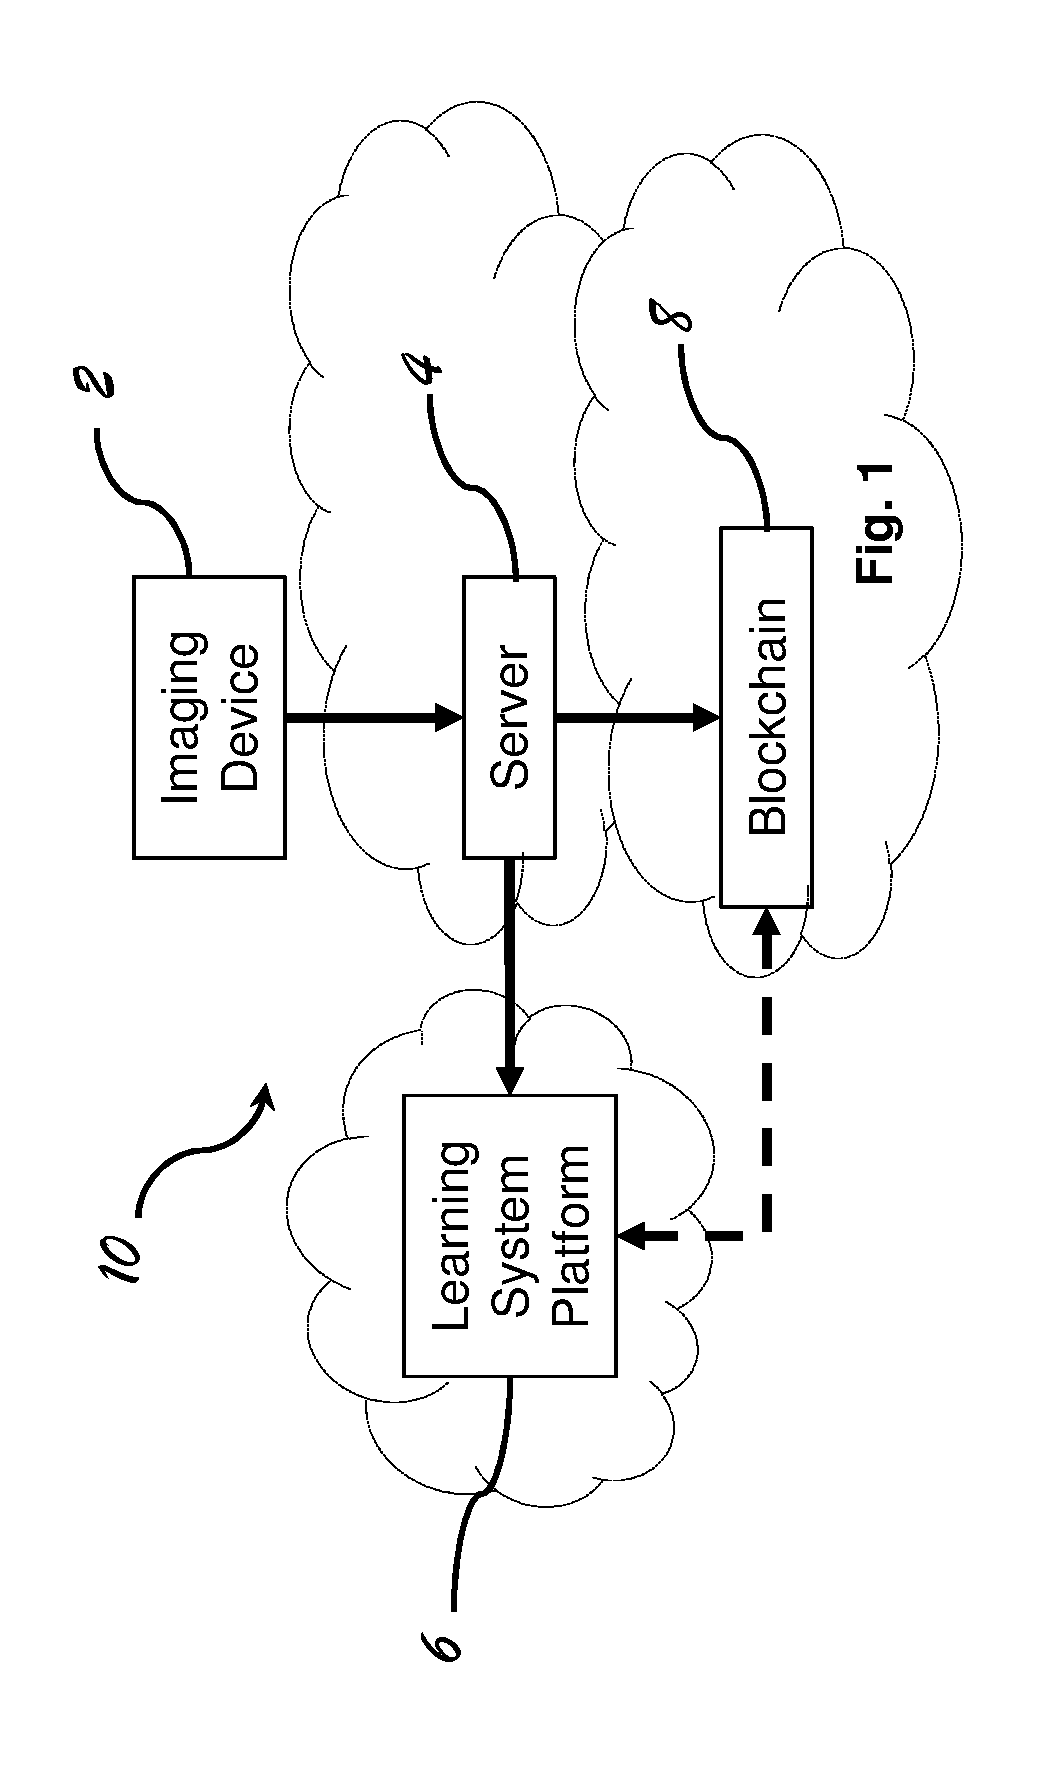 Data aggregation, integration and analysis system and related devices and methods